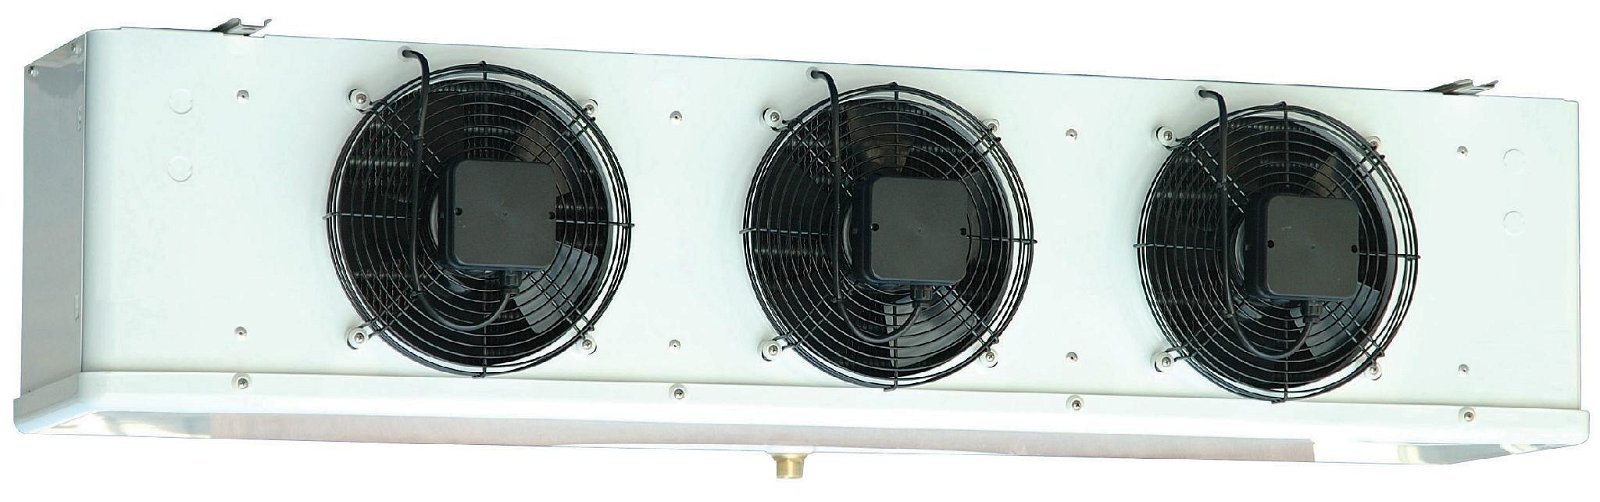 REA series forced convection air coolers 3